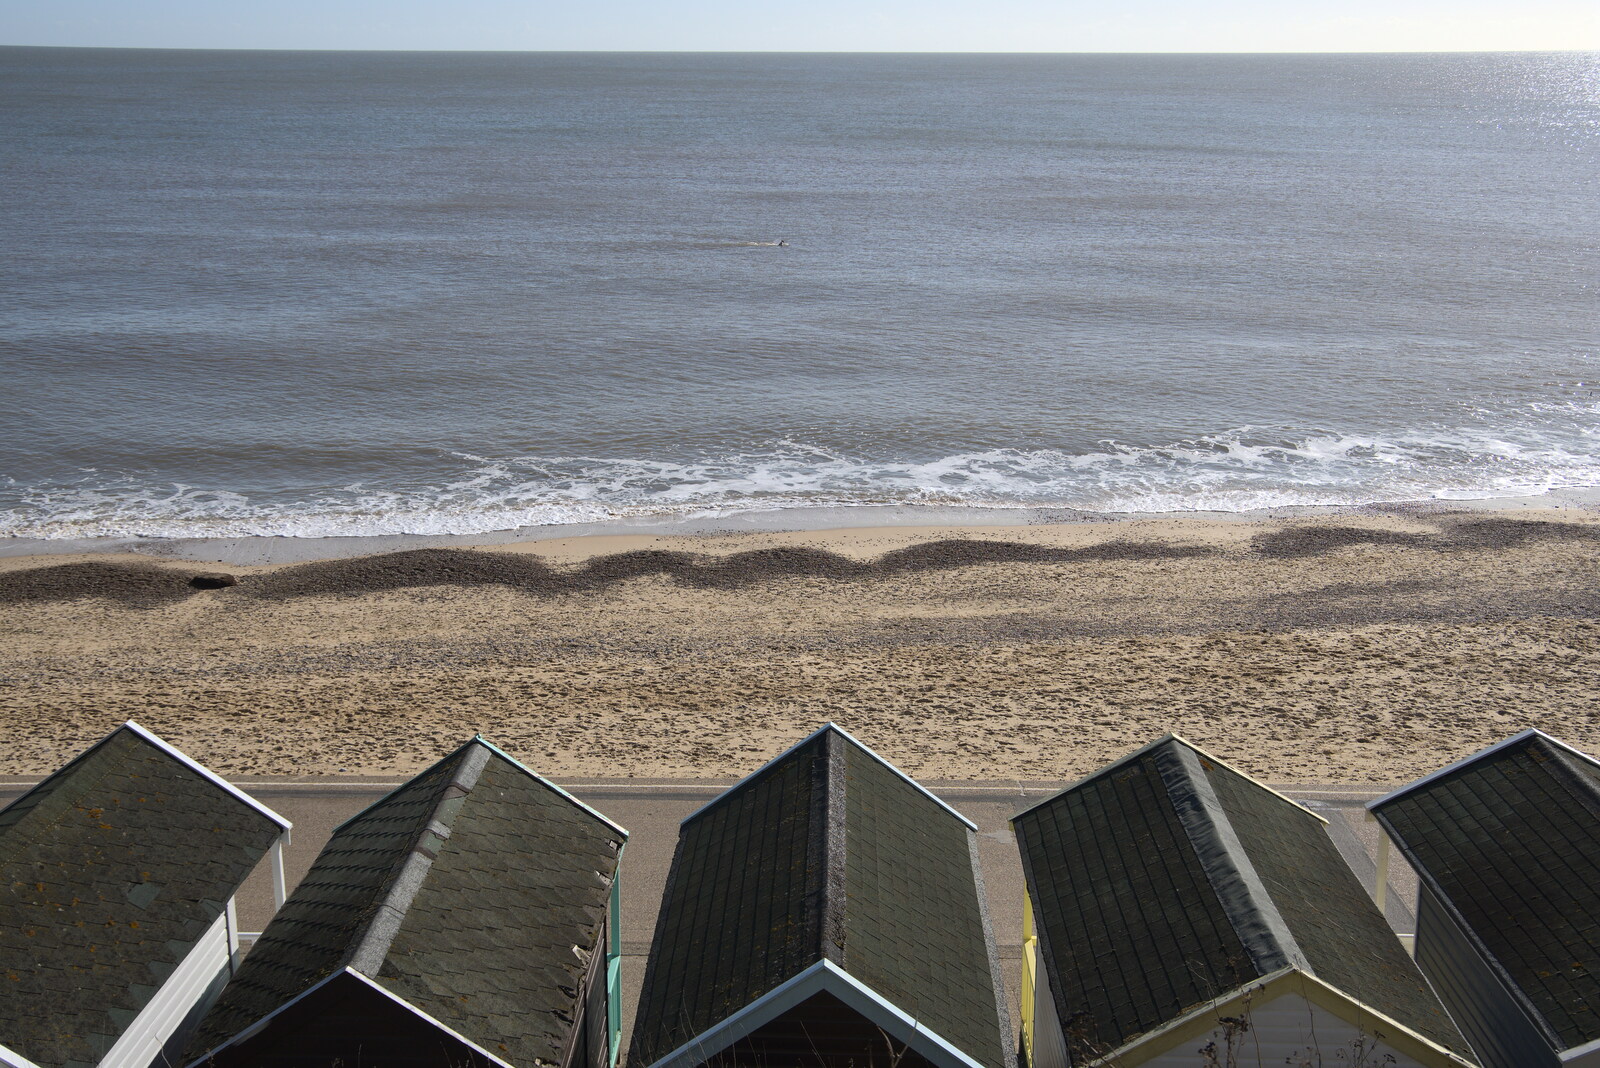 Harry's Scout Hike, Walberswick and Dunwich, Suffolk - 9th October 2022: A view out to sea over beach huts